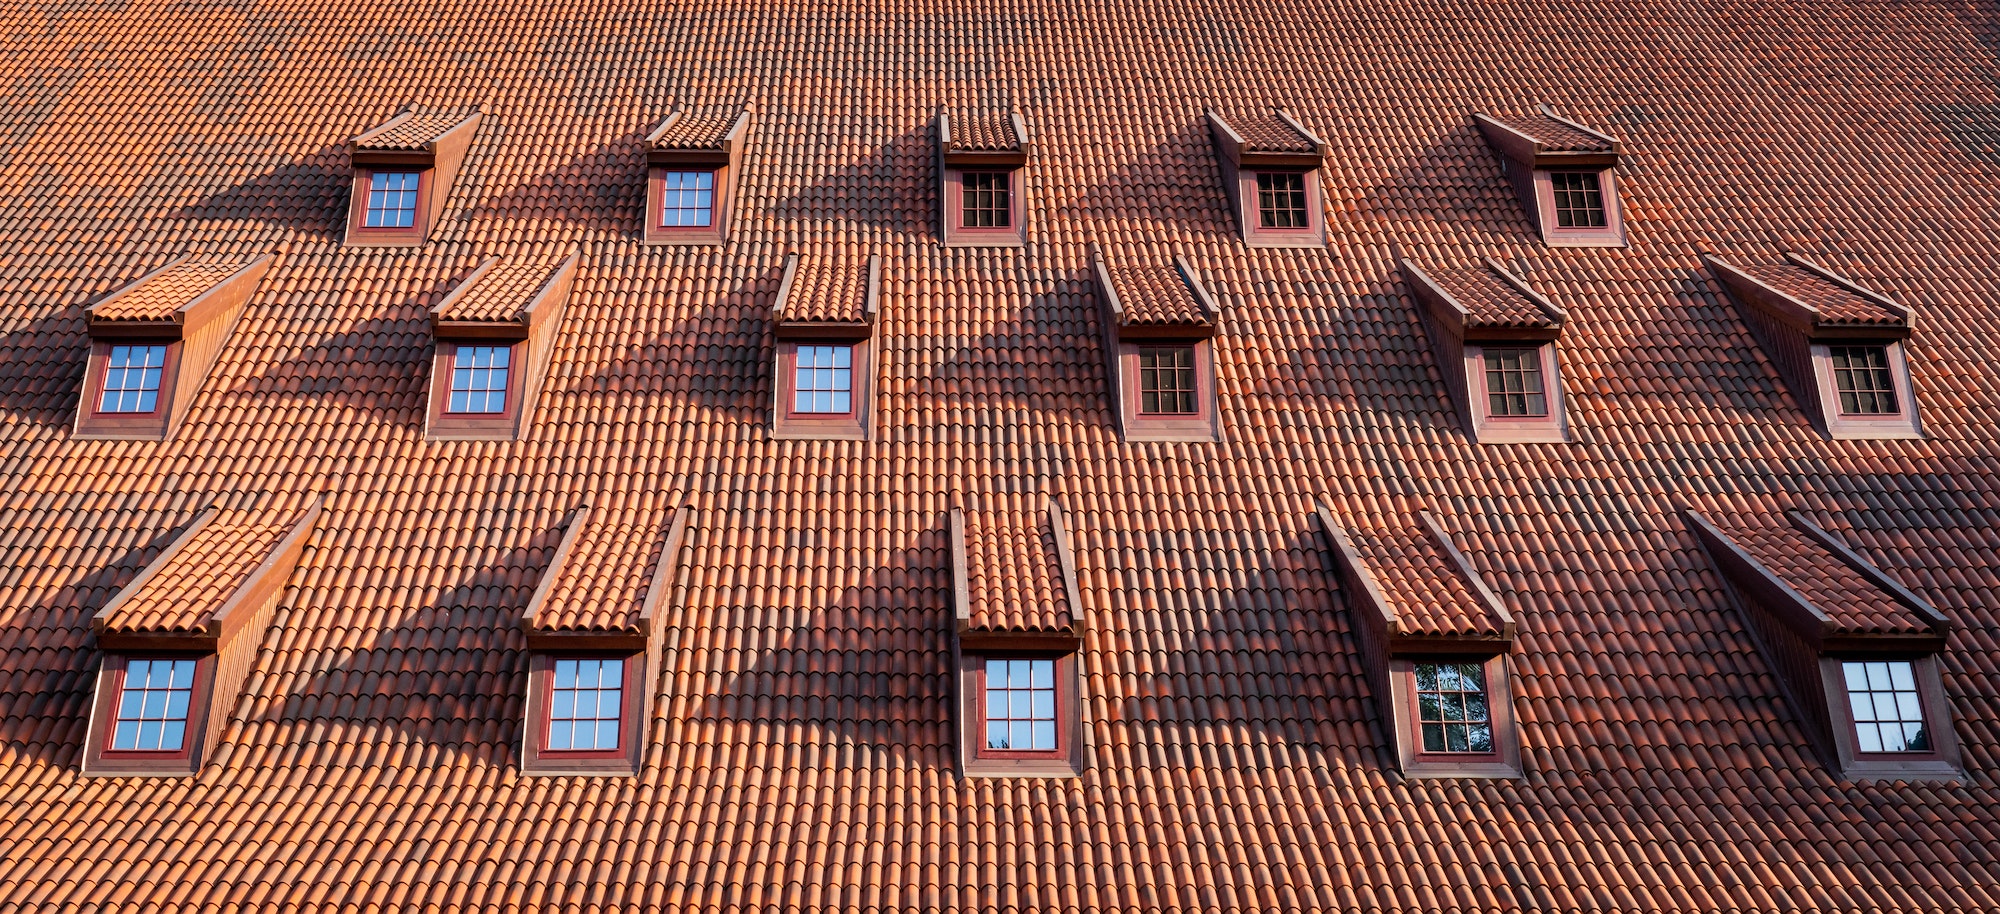 Traditional roof with windows covered by ceramic tiles